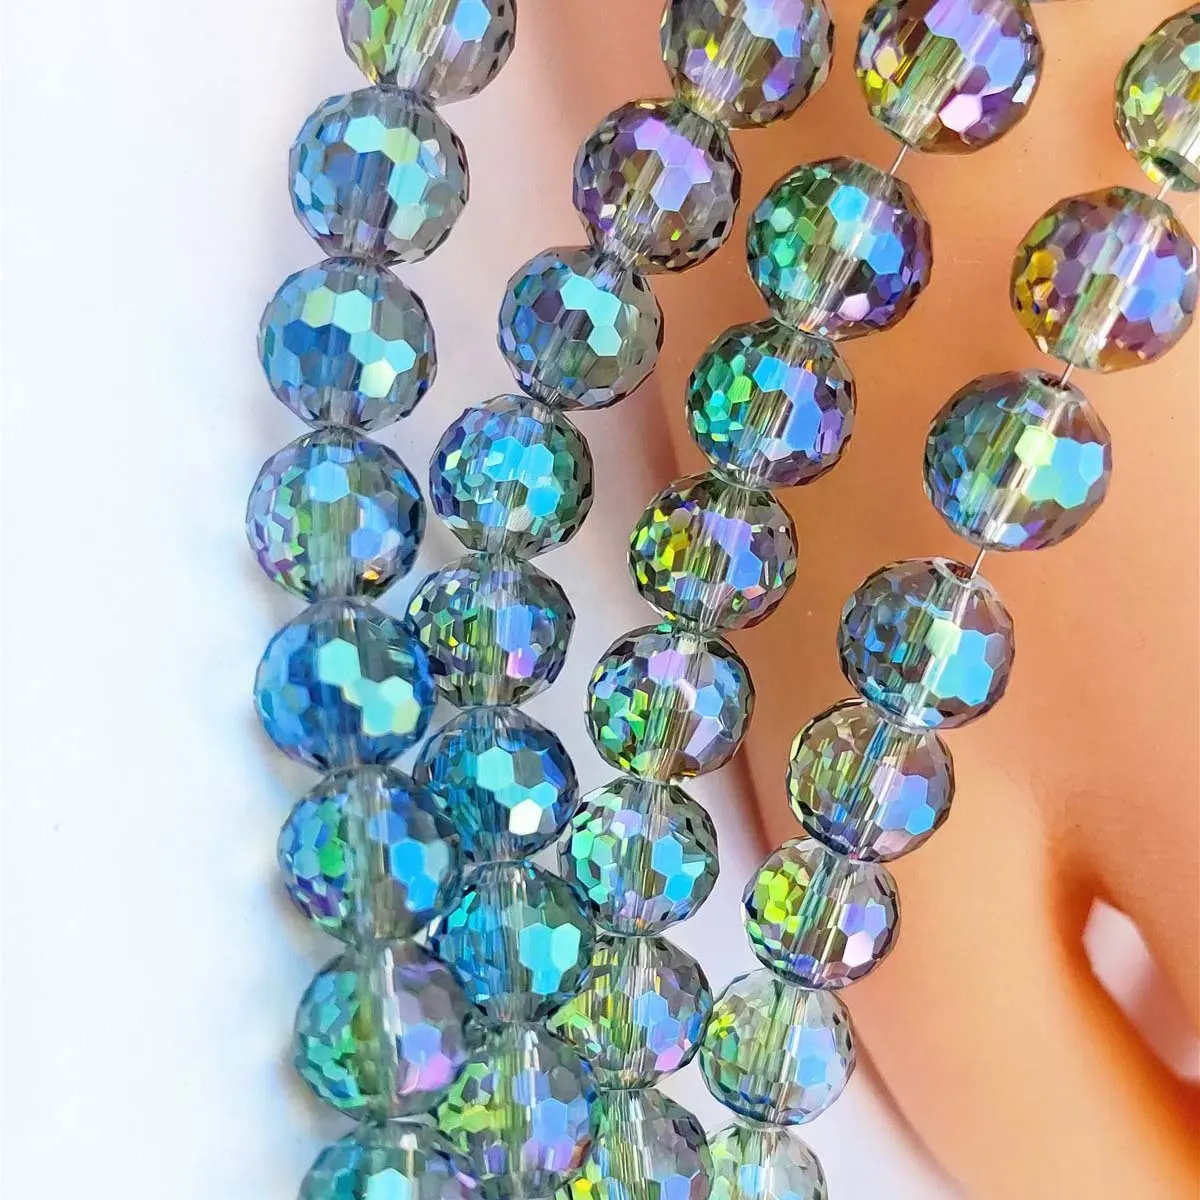 Hot Selling DIY 12 MM 96 cut faceted round beads crystal glass ball beads for Jewelry Making hand make beads